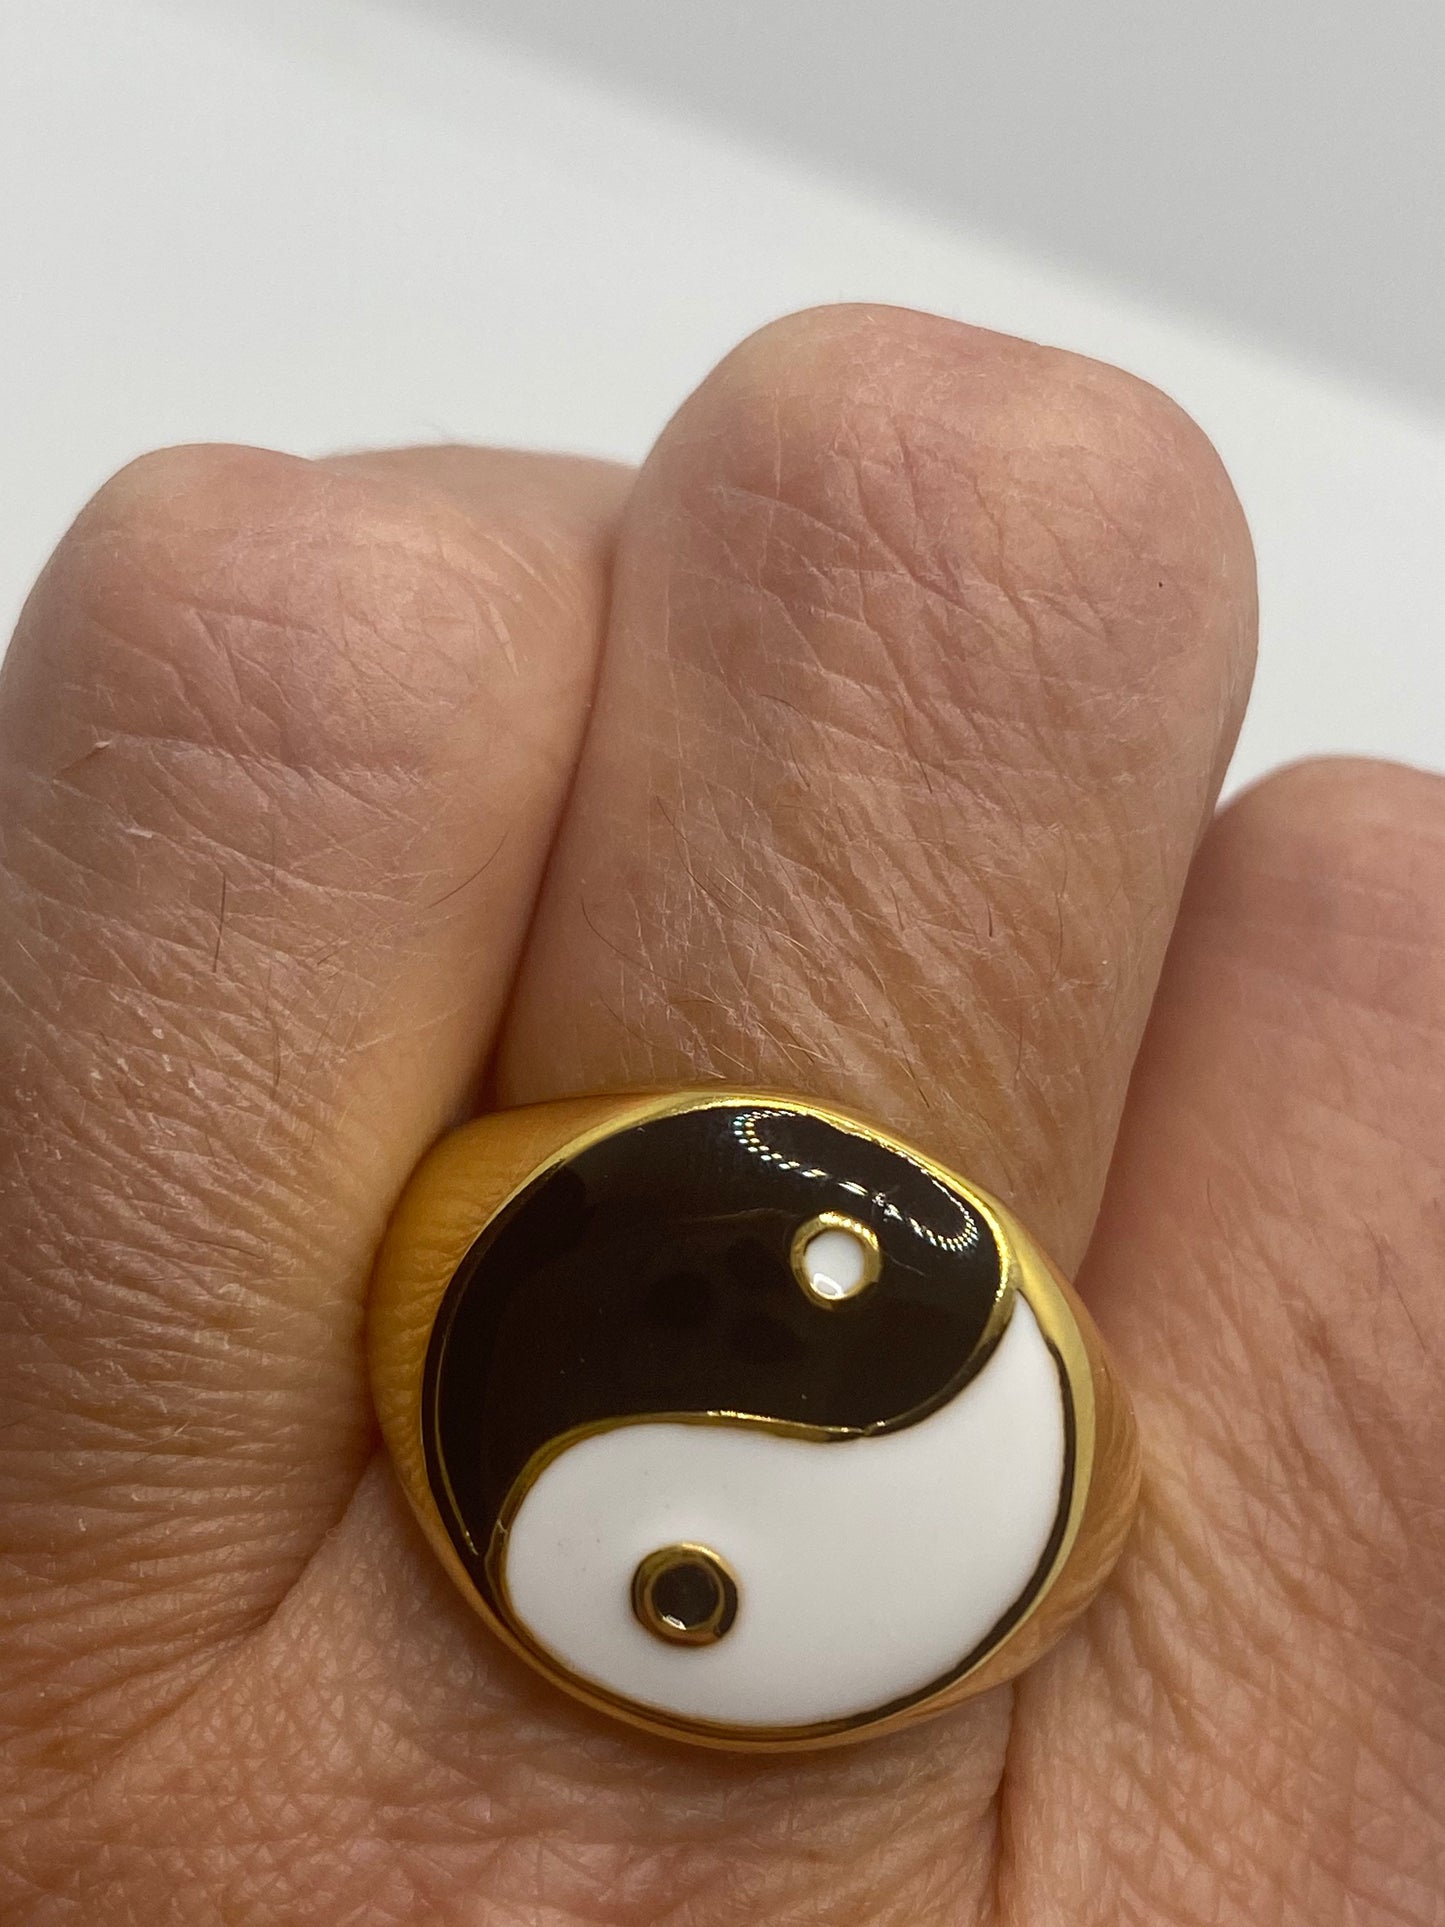 Vintage Gothic Yin Yang Gold Stainless Mens Ring